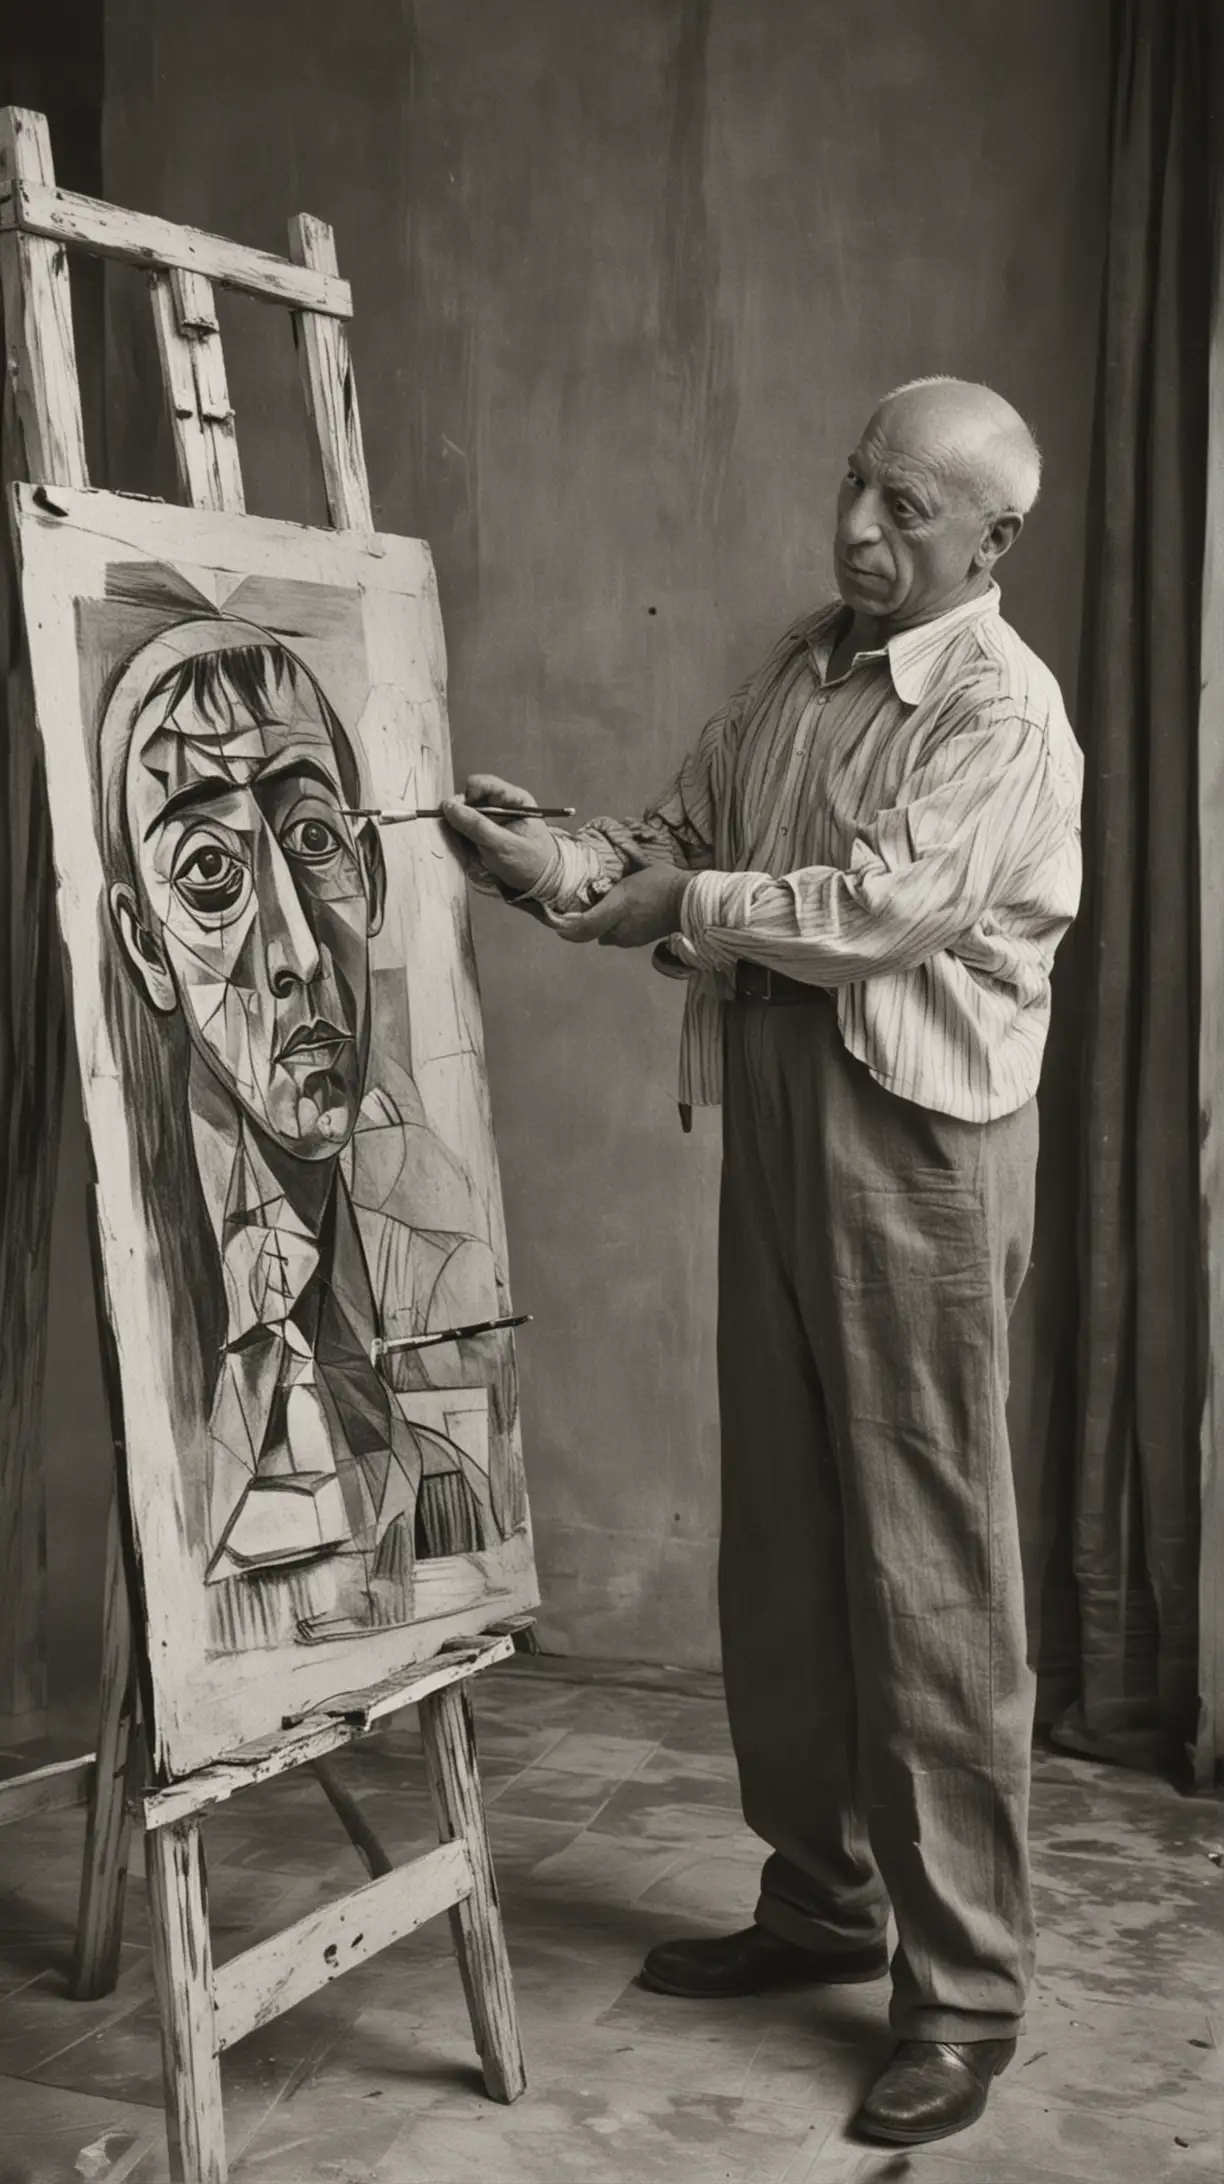 Show Pablo Picasso when he was painting , show during his time